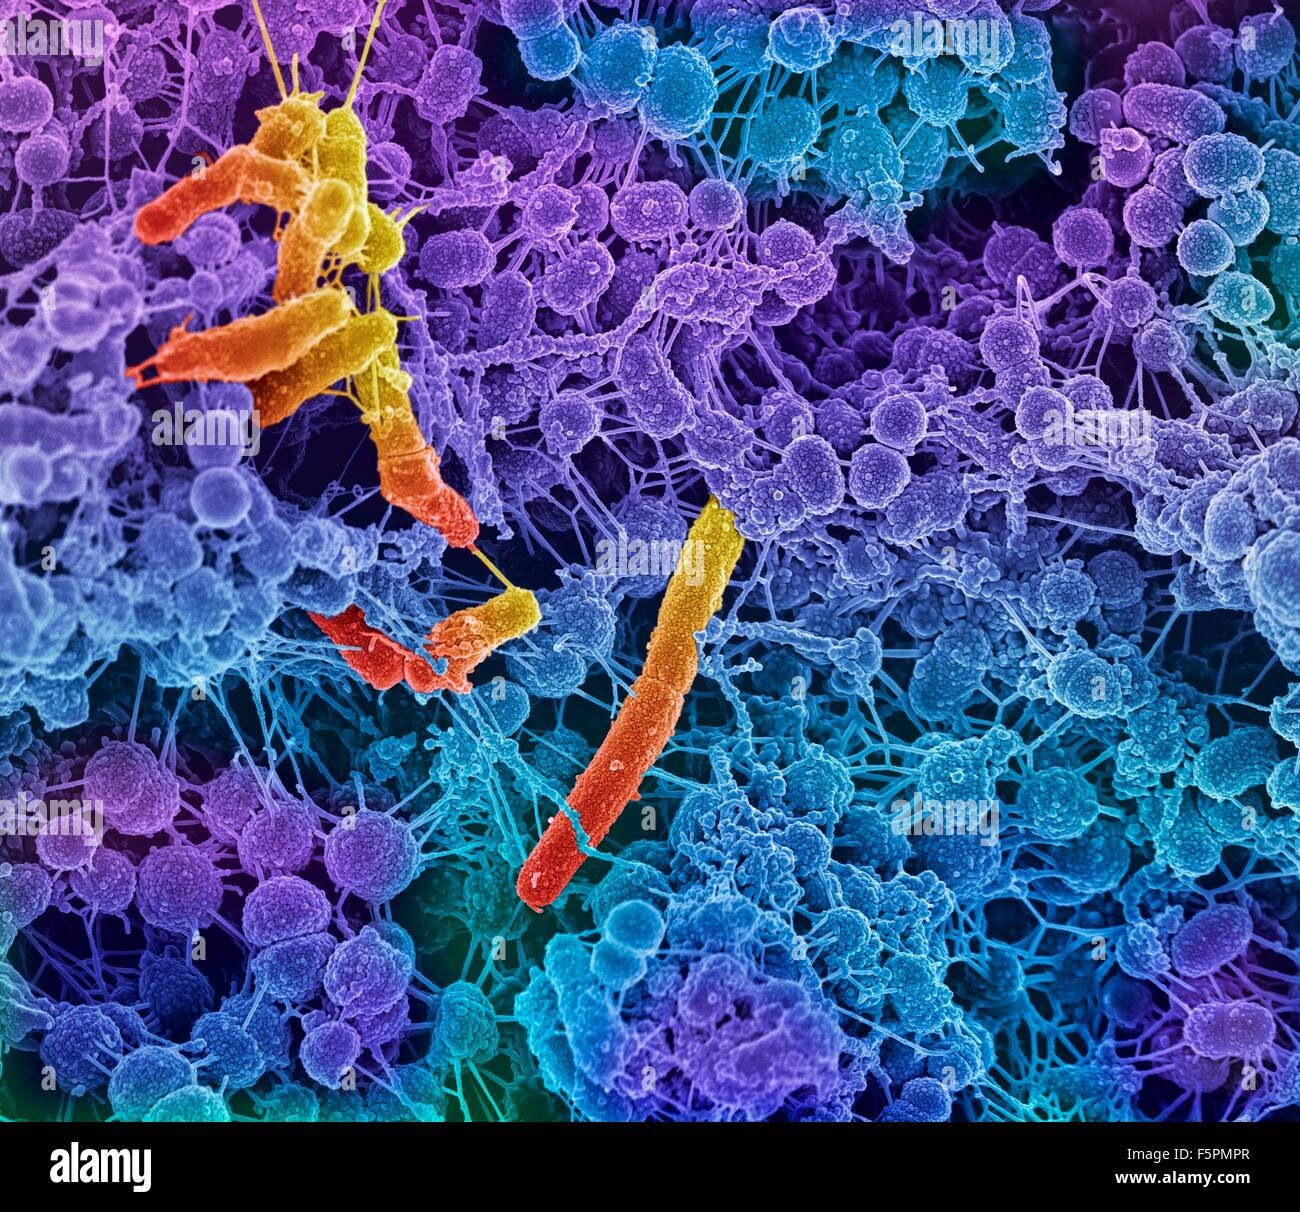 Oral bacteria. Coloured scanning electron micrograph (SEM) of mixed oral bacteria (Streptococcus, round) and bacilli bacteria, Stock Photo